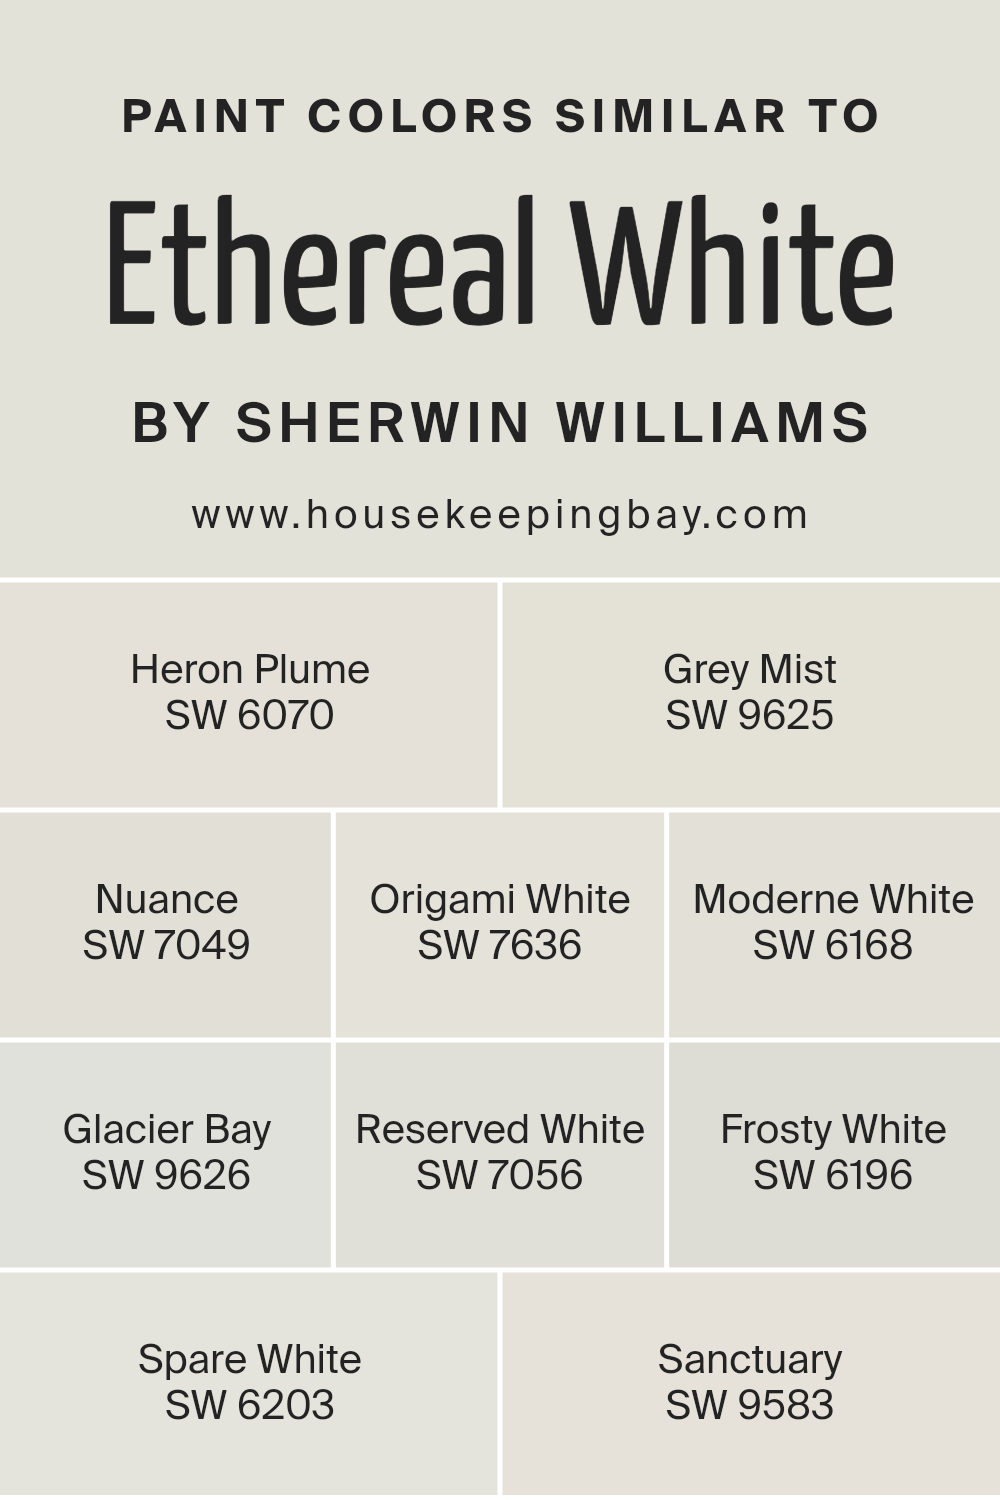 colors_similar_to_ethereal_white_sw_6182